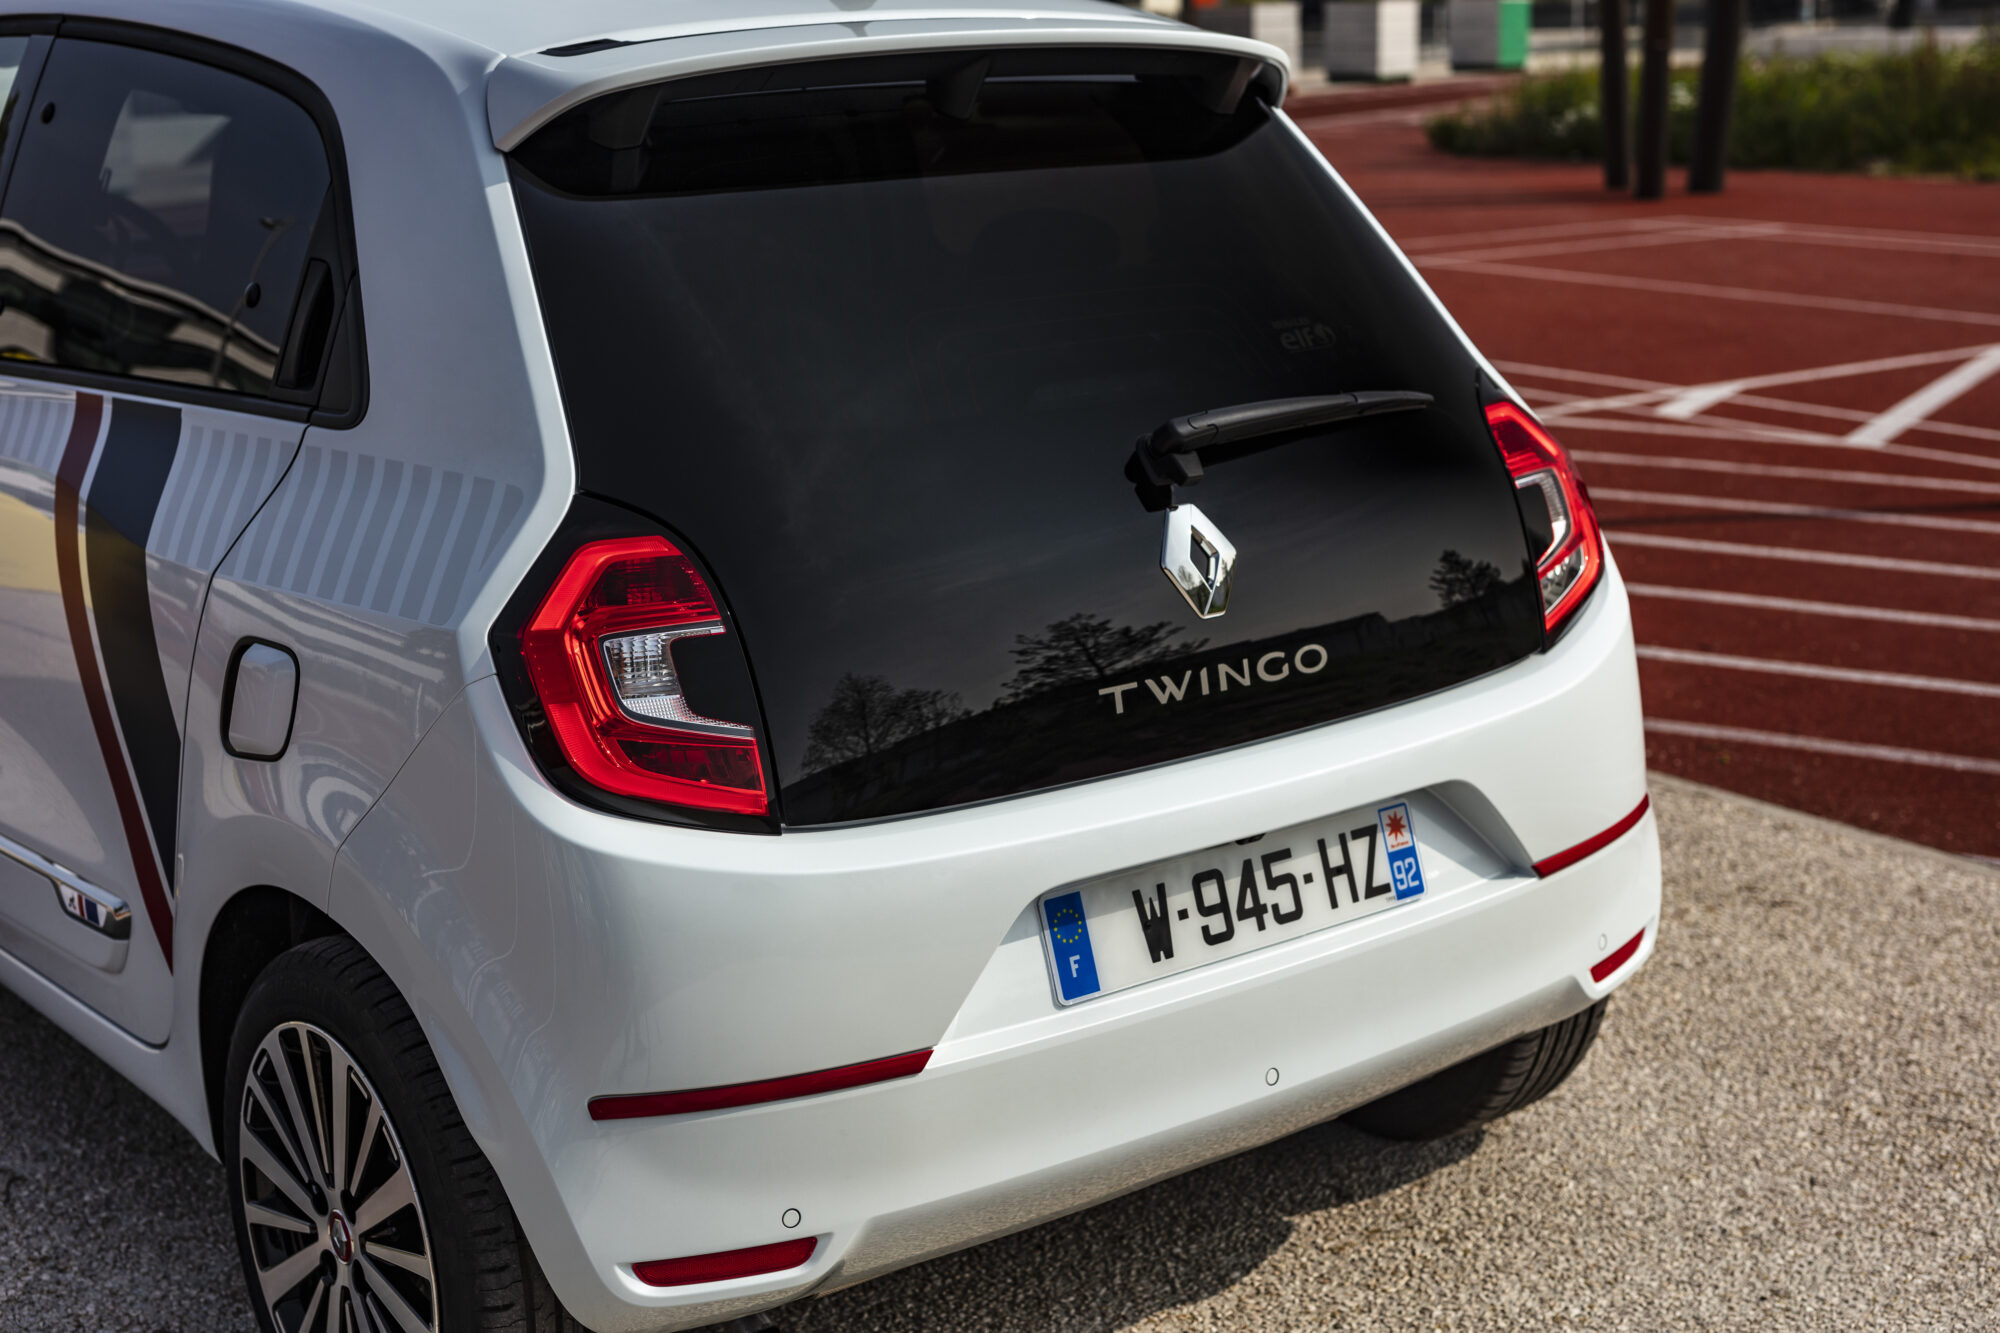 2019 - New Renault TWINGO Le Coq Sportif Limited Edition